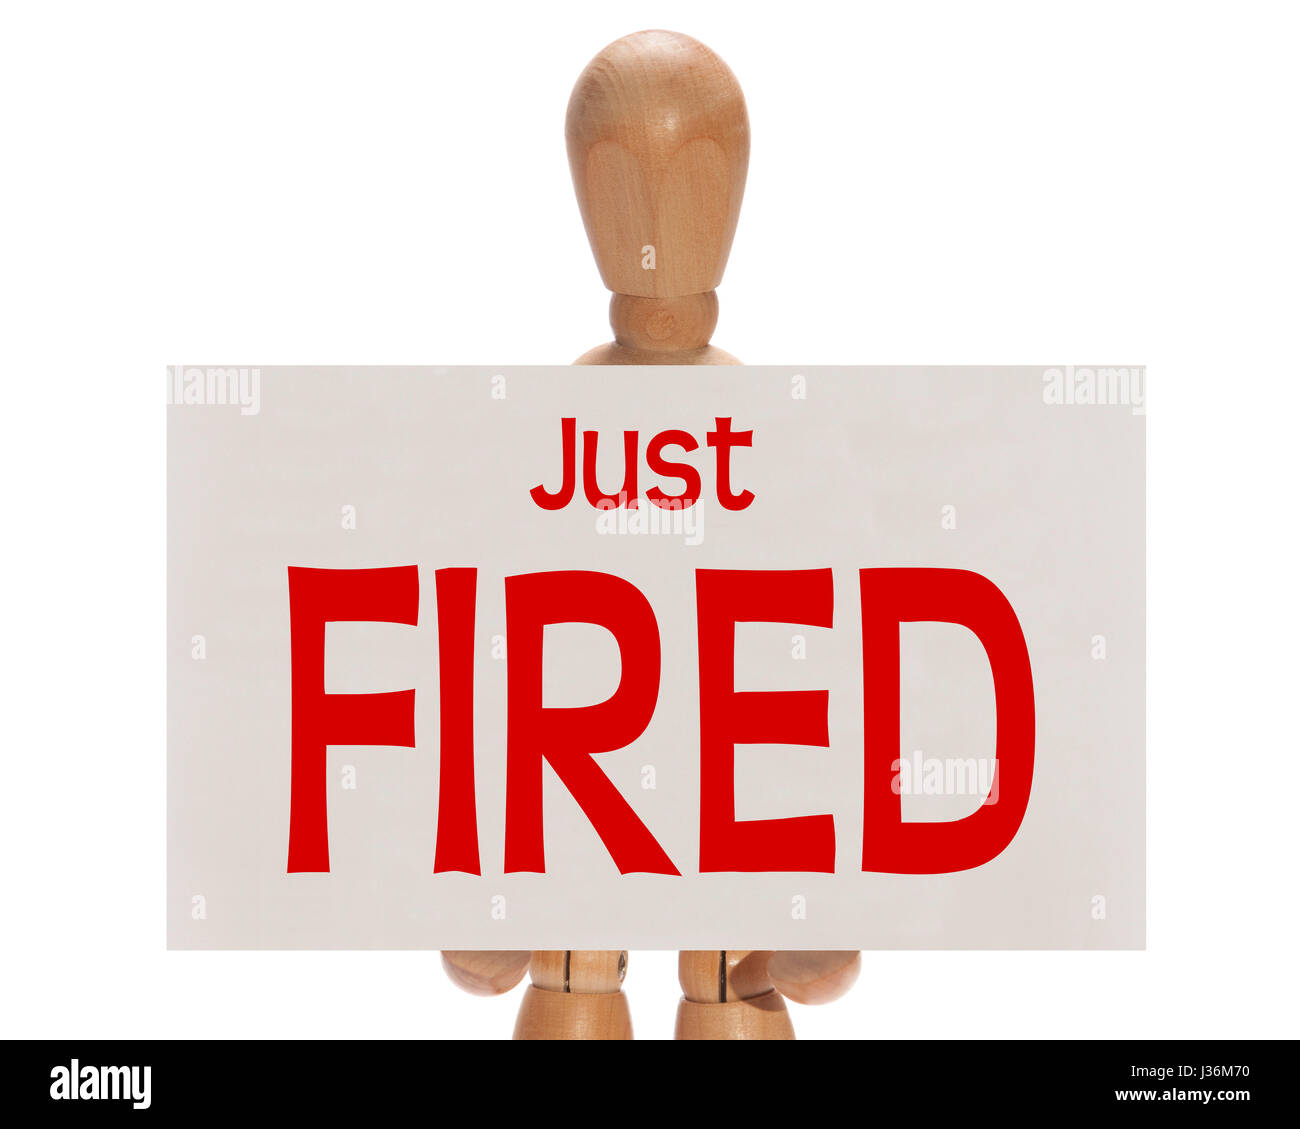 Wooden mannequin holding a white card with the message 'Just fired' over a white background Stock Photo